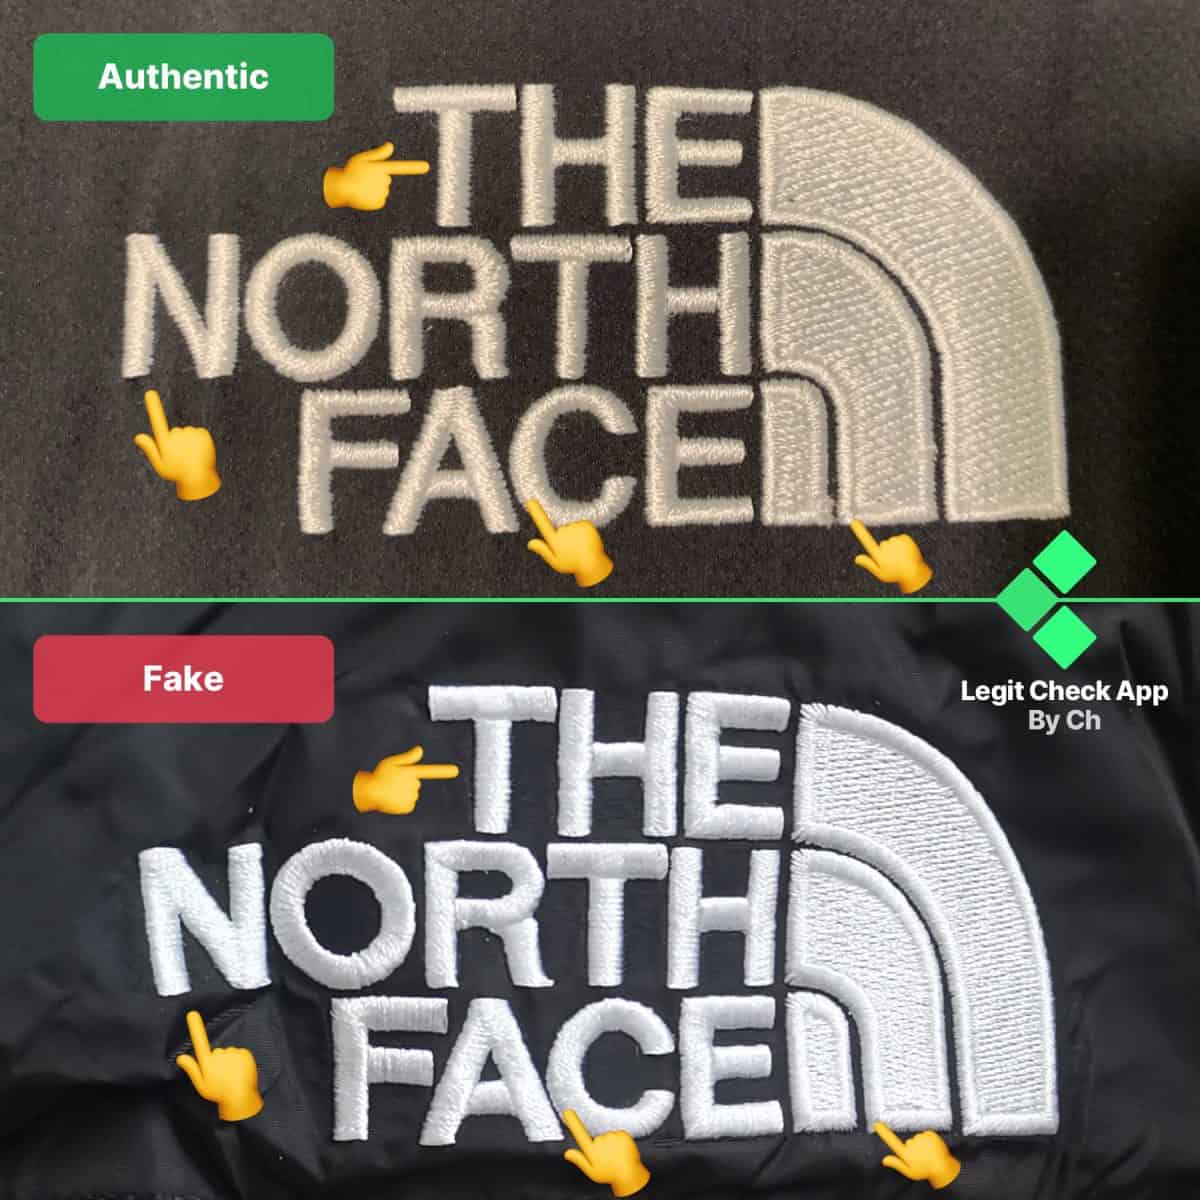 tnf jacket authenticity check guide